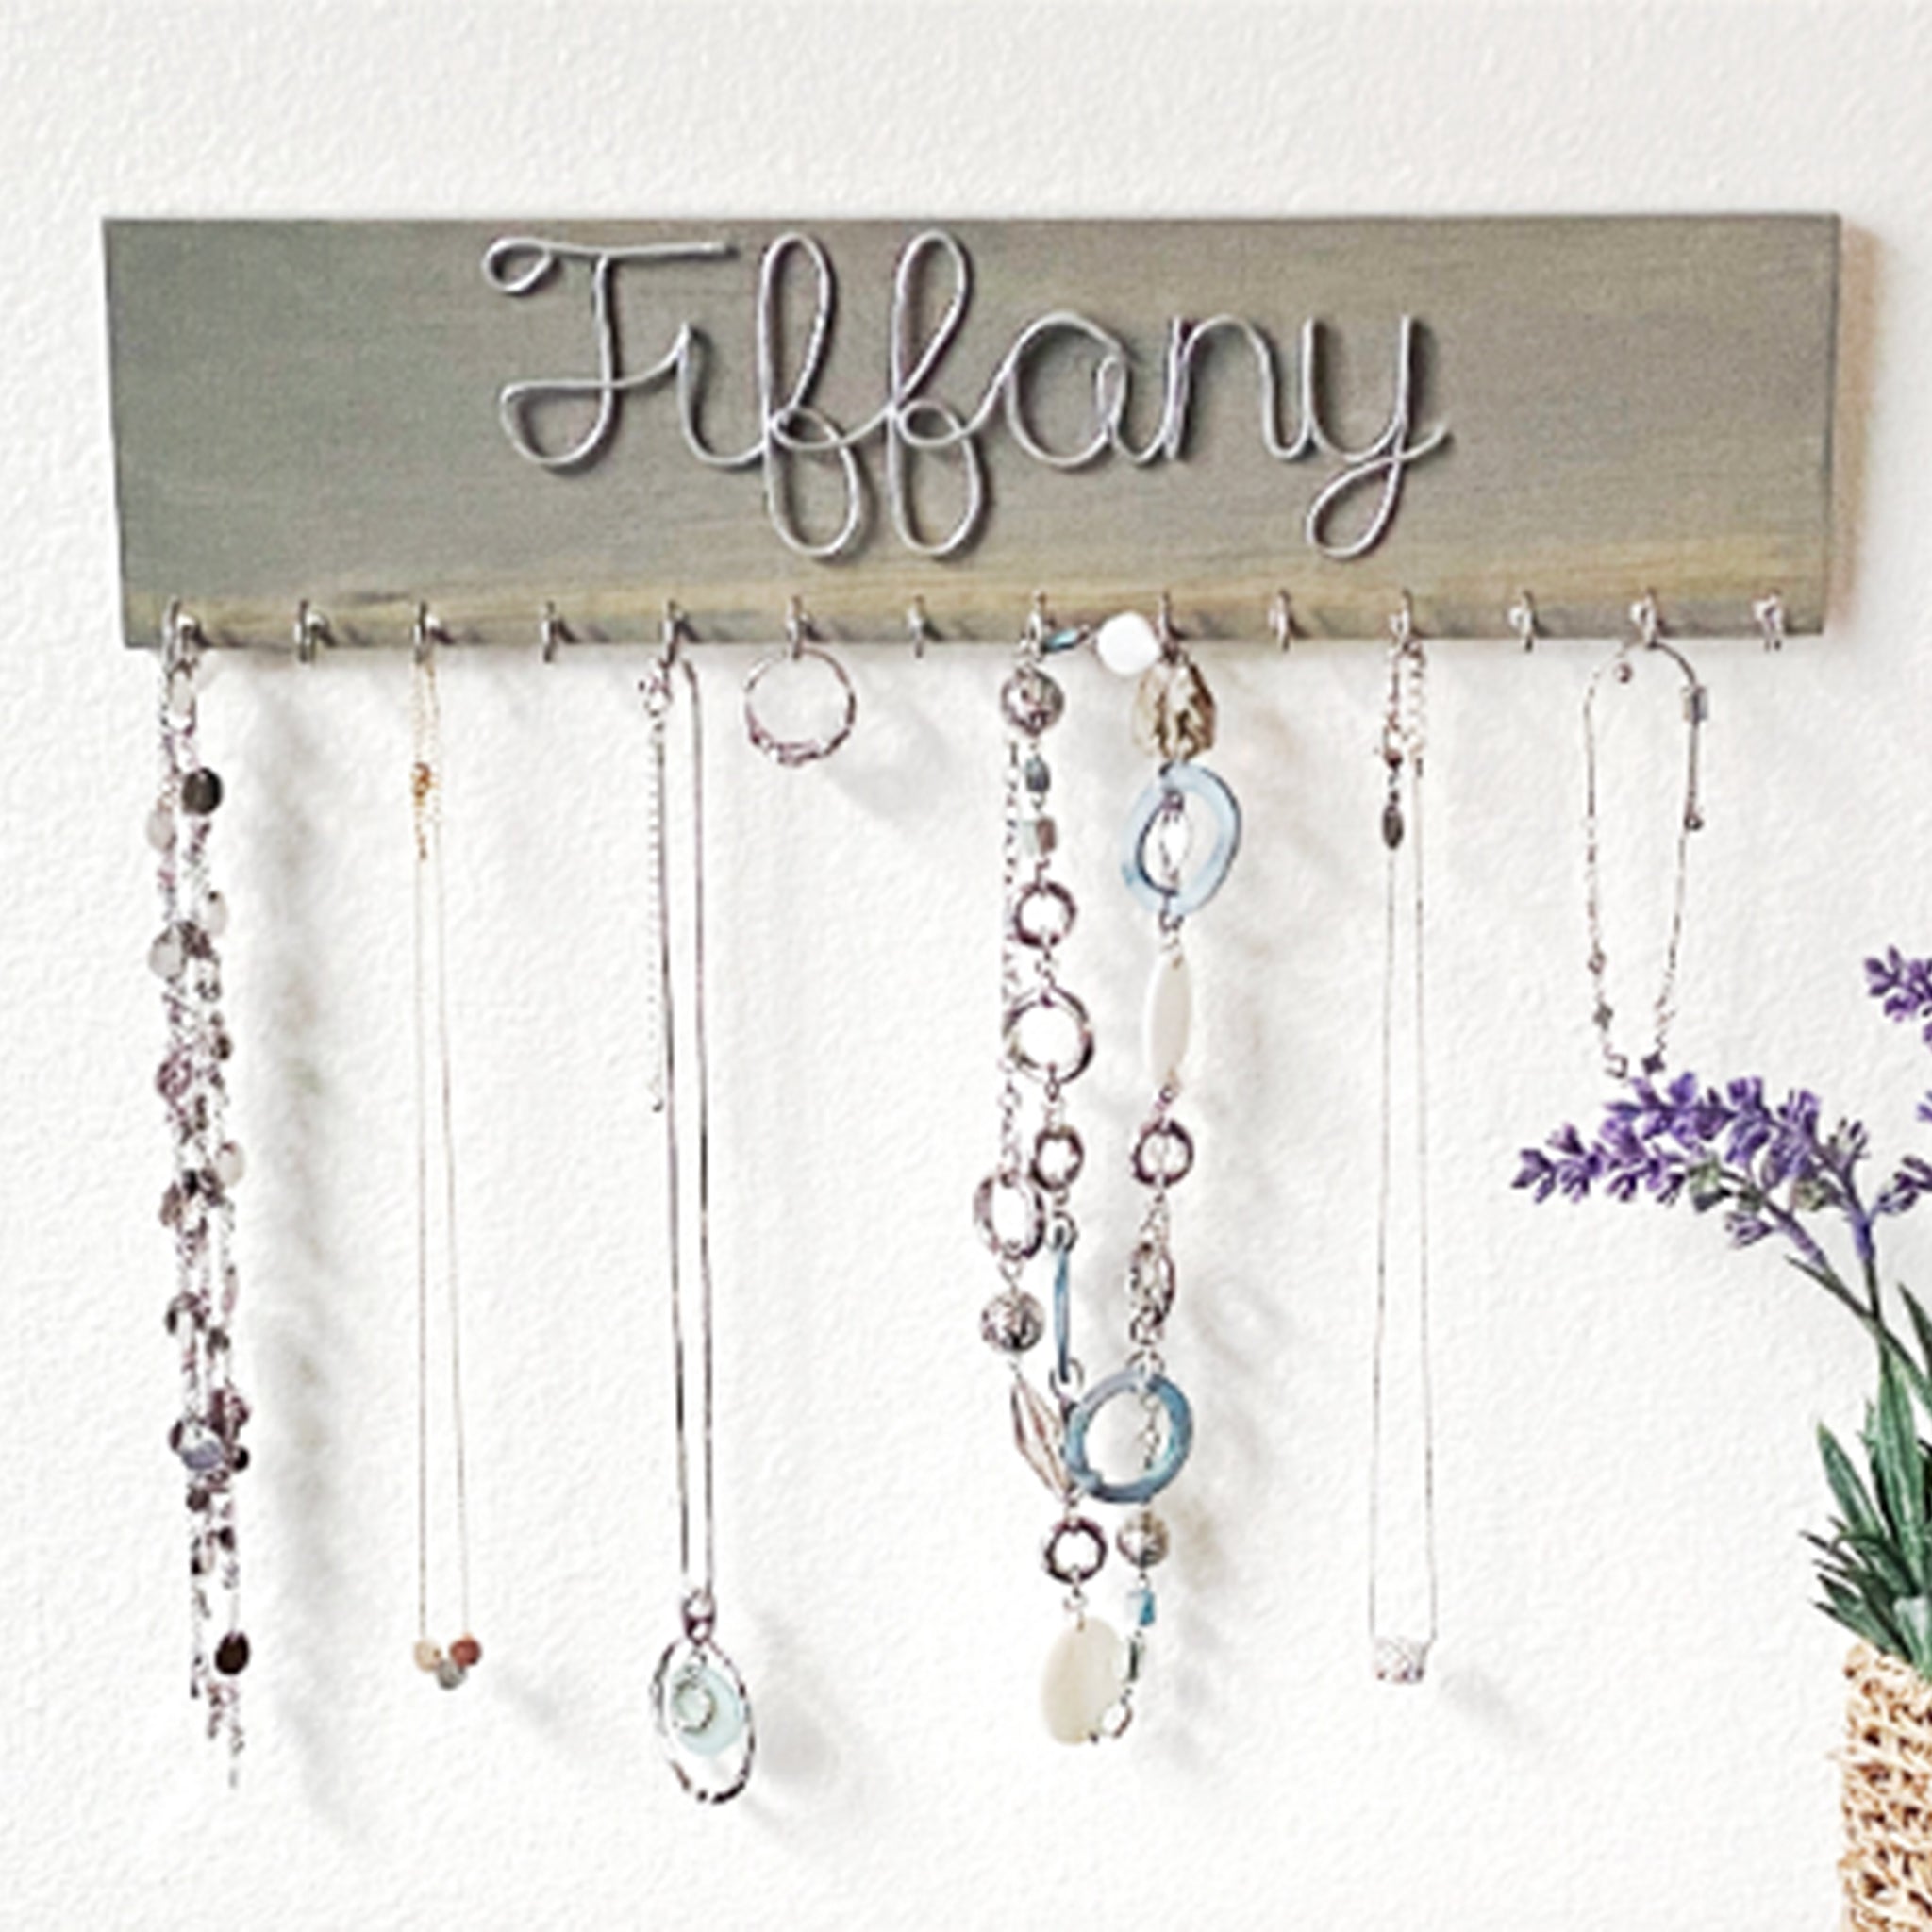 Emini Creations Personalized Necklace Hanger